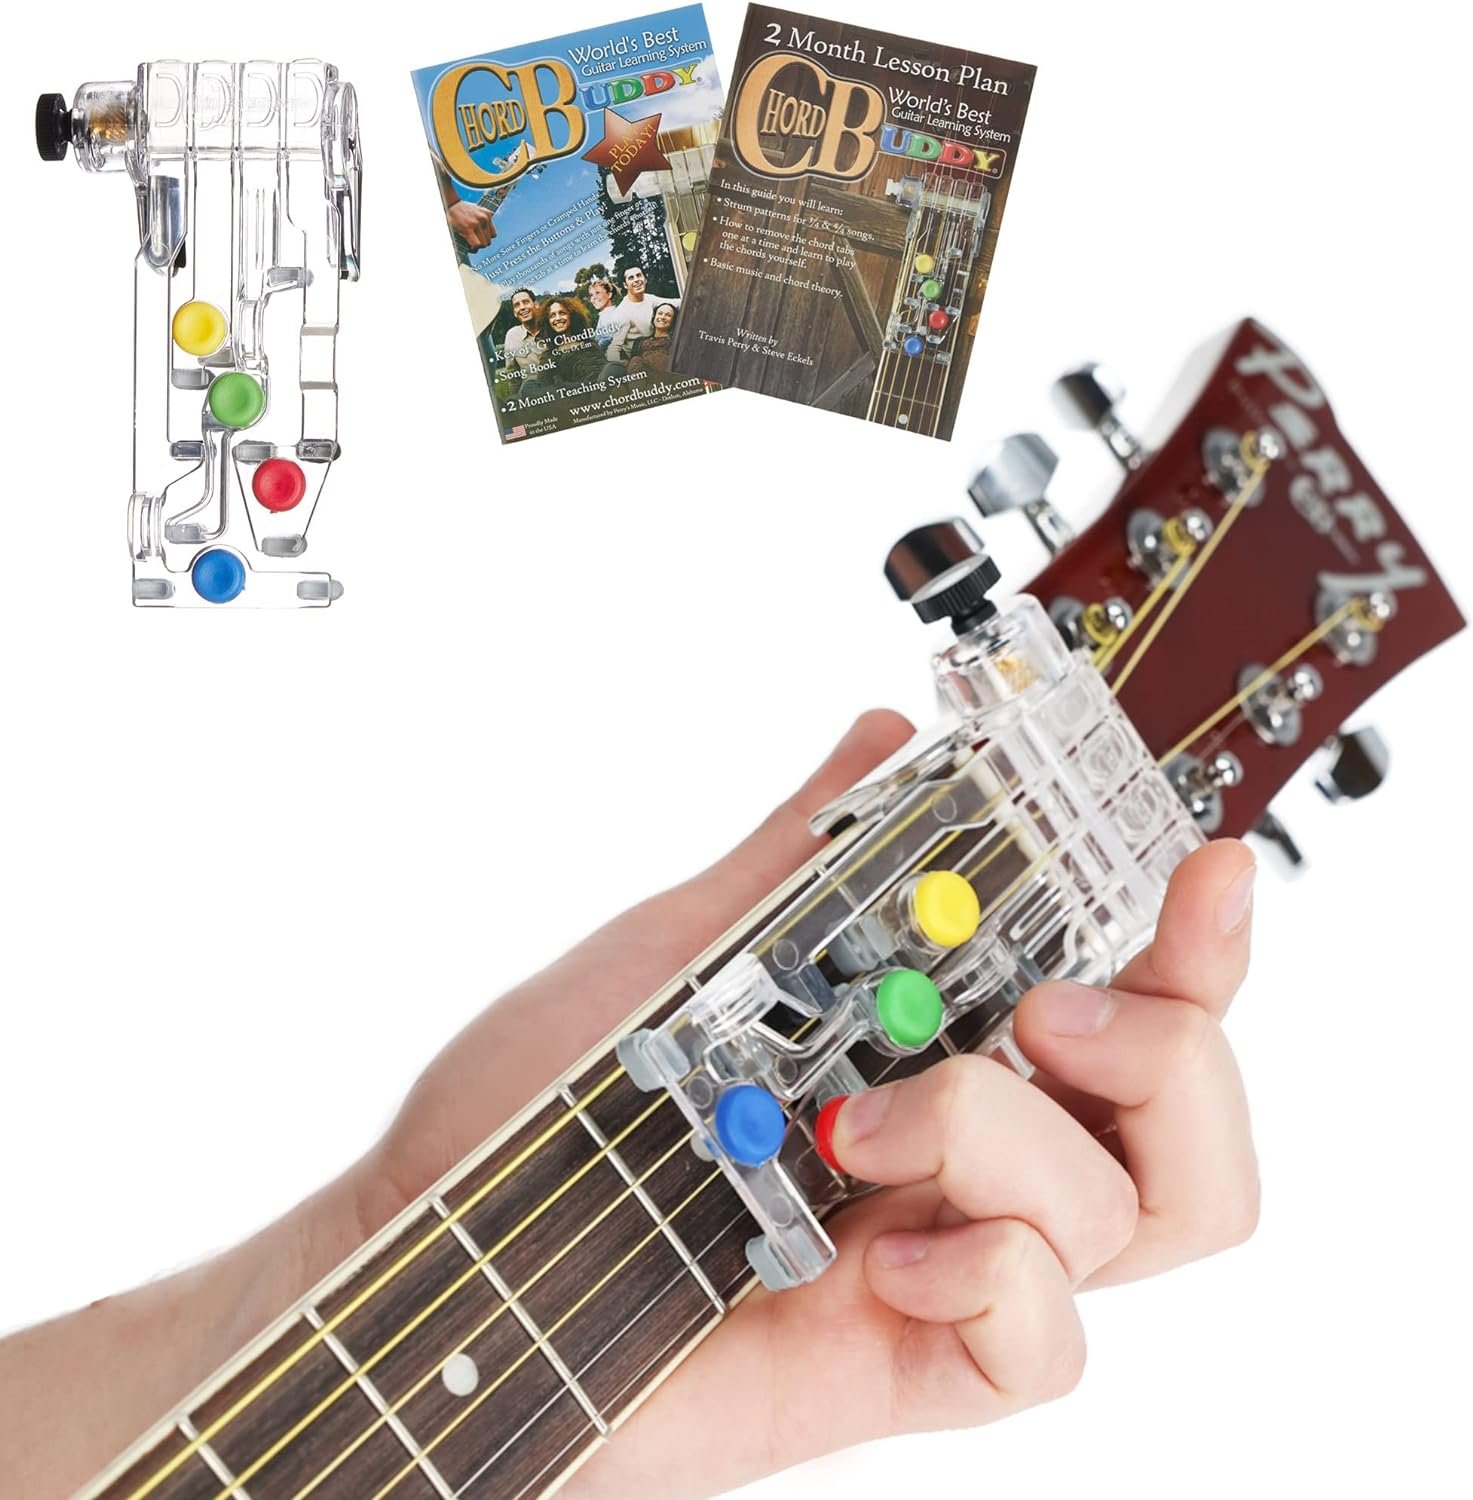 ChordBuddy “MADE IN THE USA” - Guitar Learning with Songbook, Lesson Plan, App, and Right Handed ChordBuddy